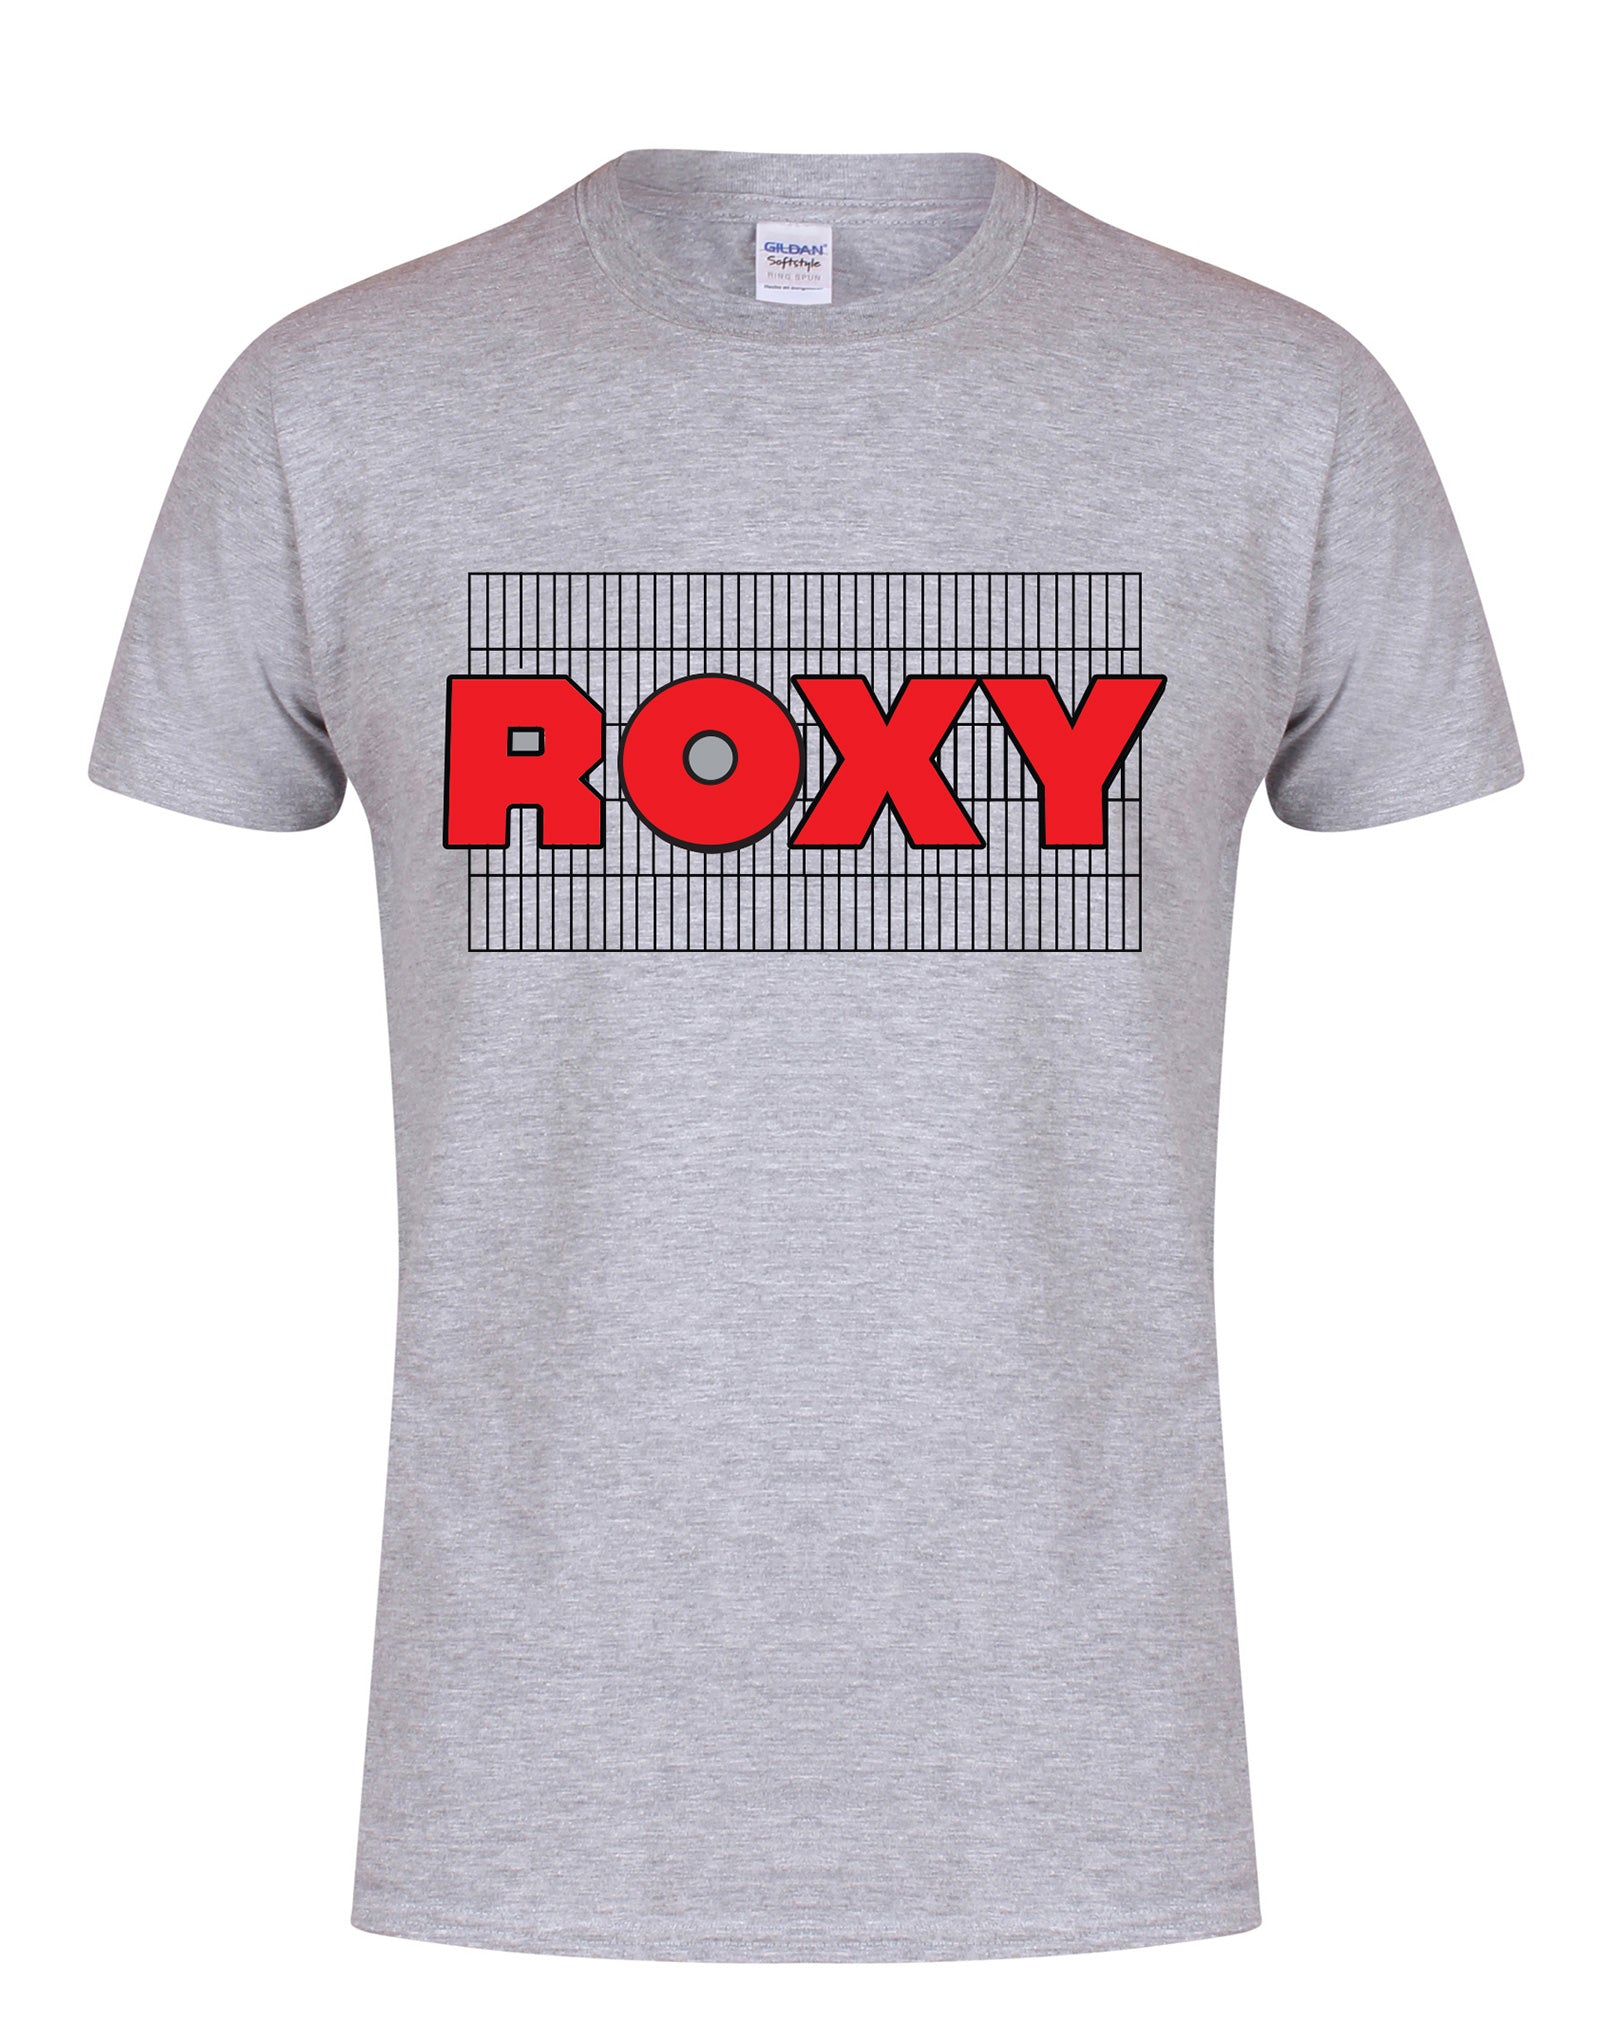 Roxy unisex fit T-shirt - various colours - Dirty Stop Outs